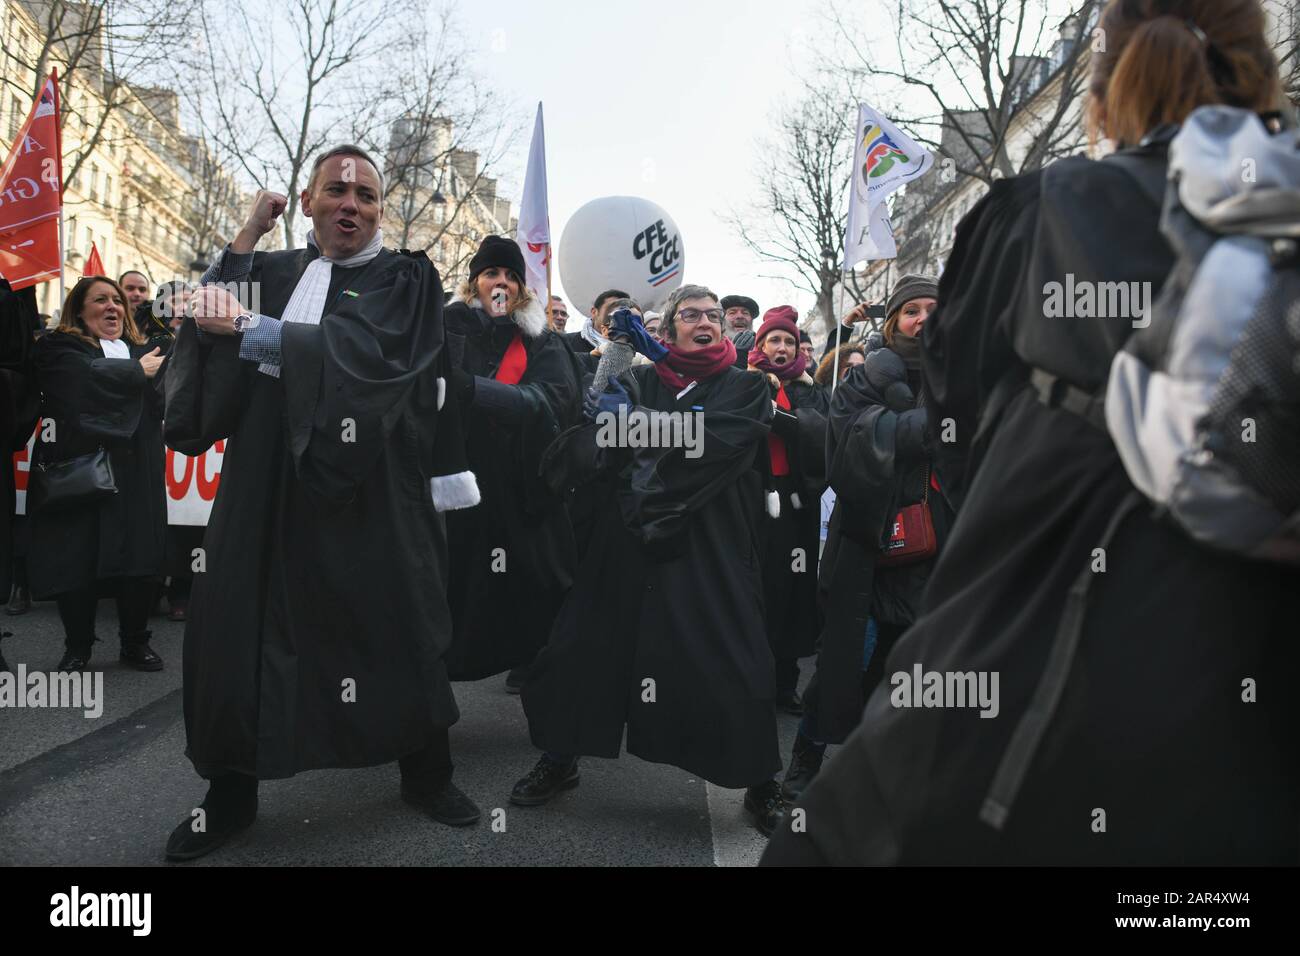 *** STRICTLY NO SALES TO FRENCH MEDIA OR PUBLISHERS *** January 24, 2020 - Paris, France: French lawyers on strike do a 'haka' choreography during a protest march against the government's pension reform plan. More than 40.000 people demonstrated against the government's pension reform plan as the protest movement enters its 51st day. Stock Photo